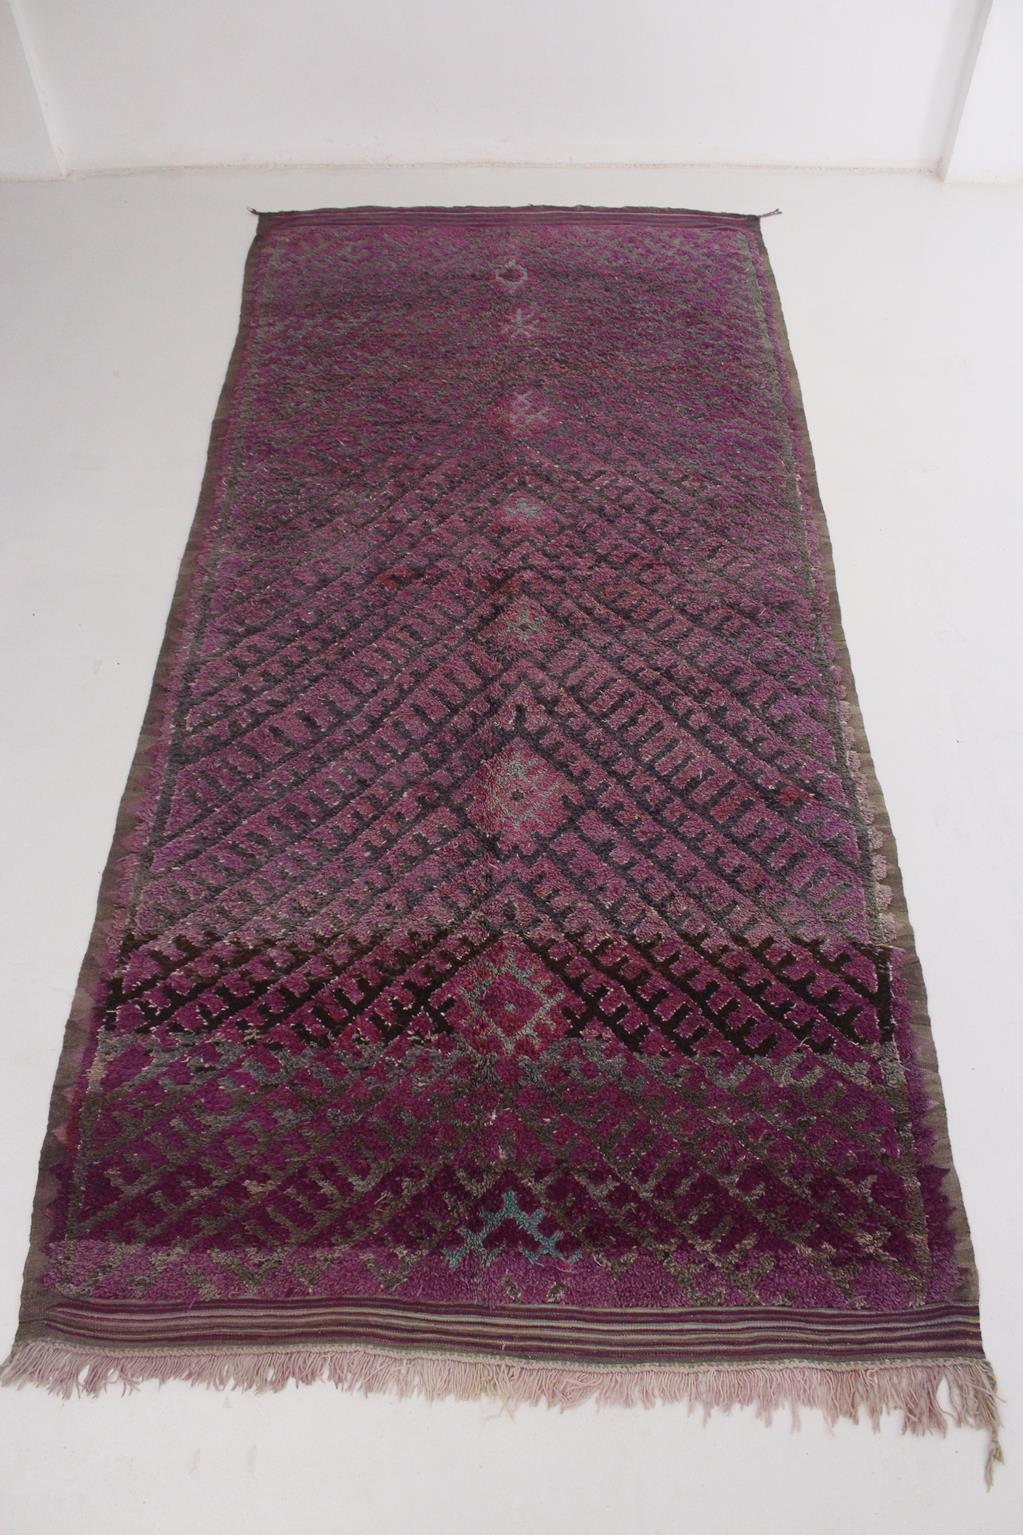 I picked that one from piles of carpets because I think that it's a beautiful, unique, tribal and such elegant piece with a great composition! Would look great under a long dining table!

Colors are several tones of purple and gray with a serie of